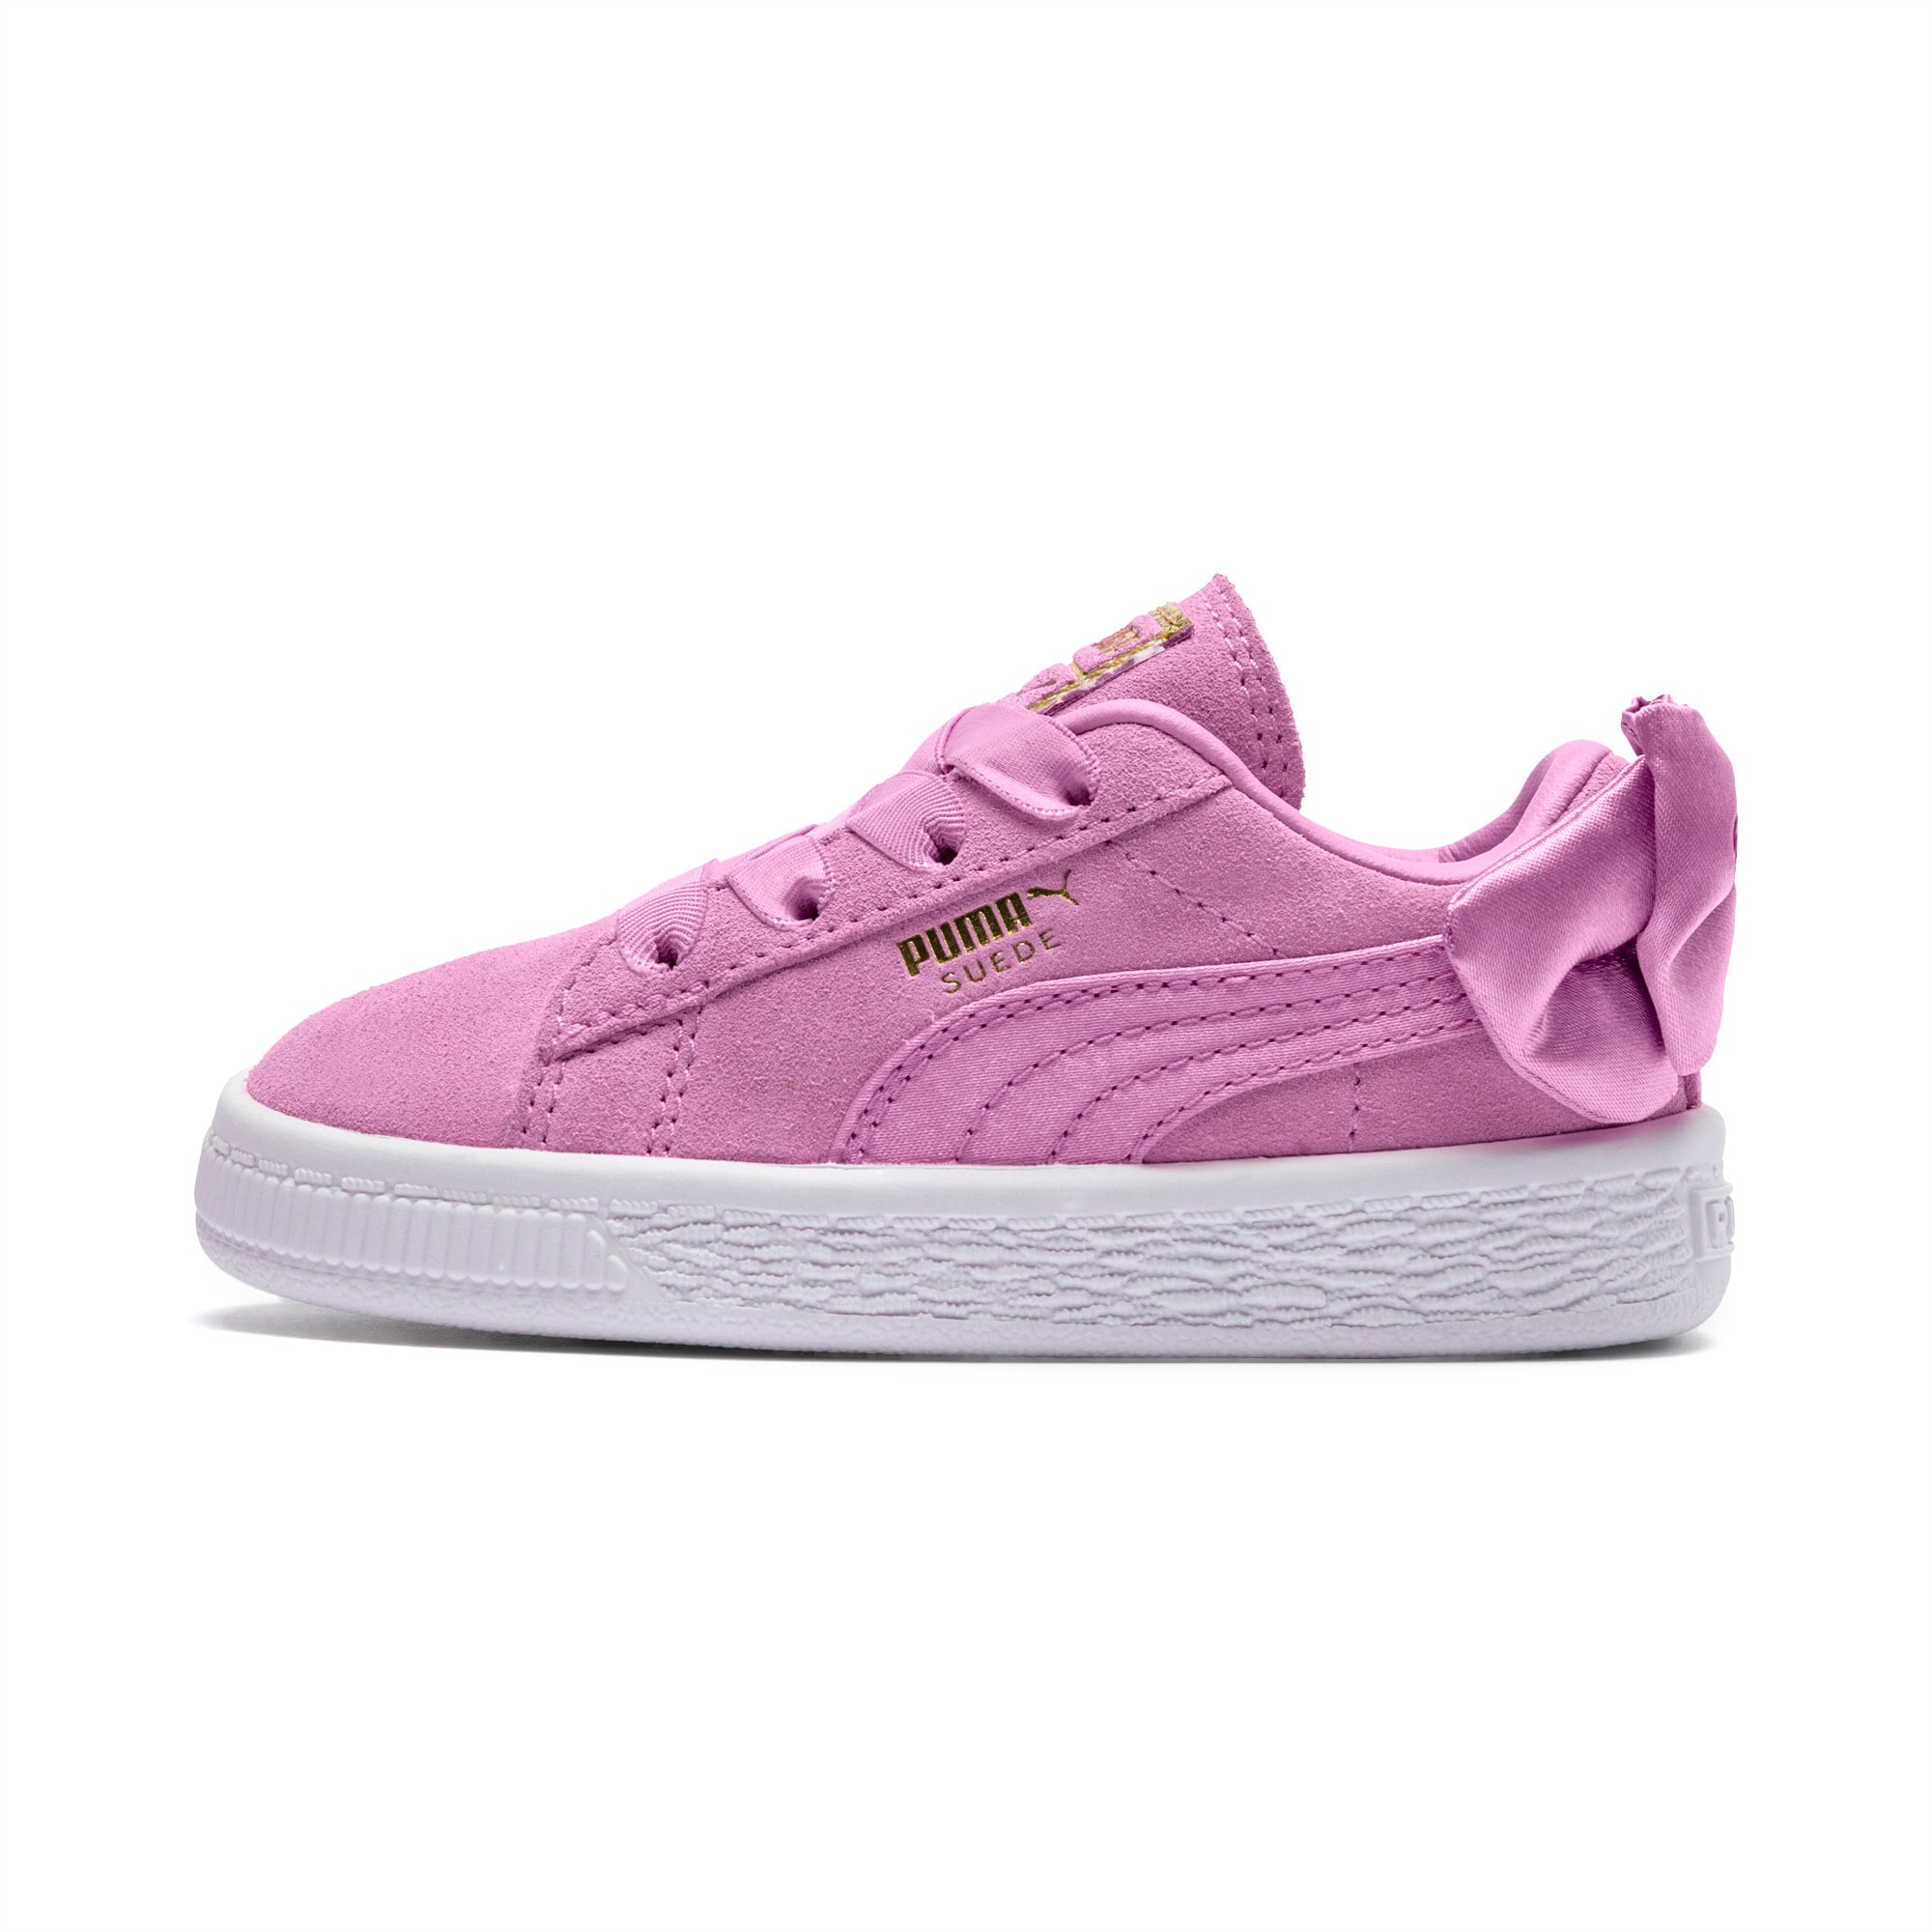 puma trainer with bow